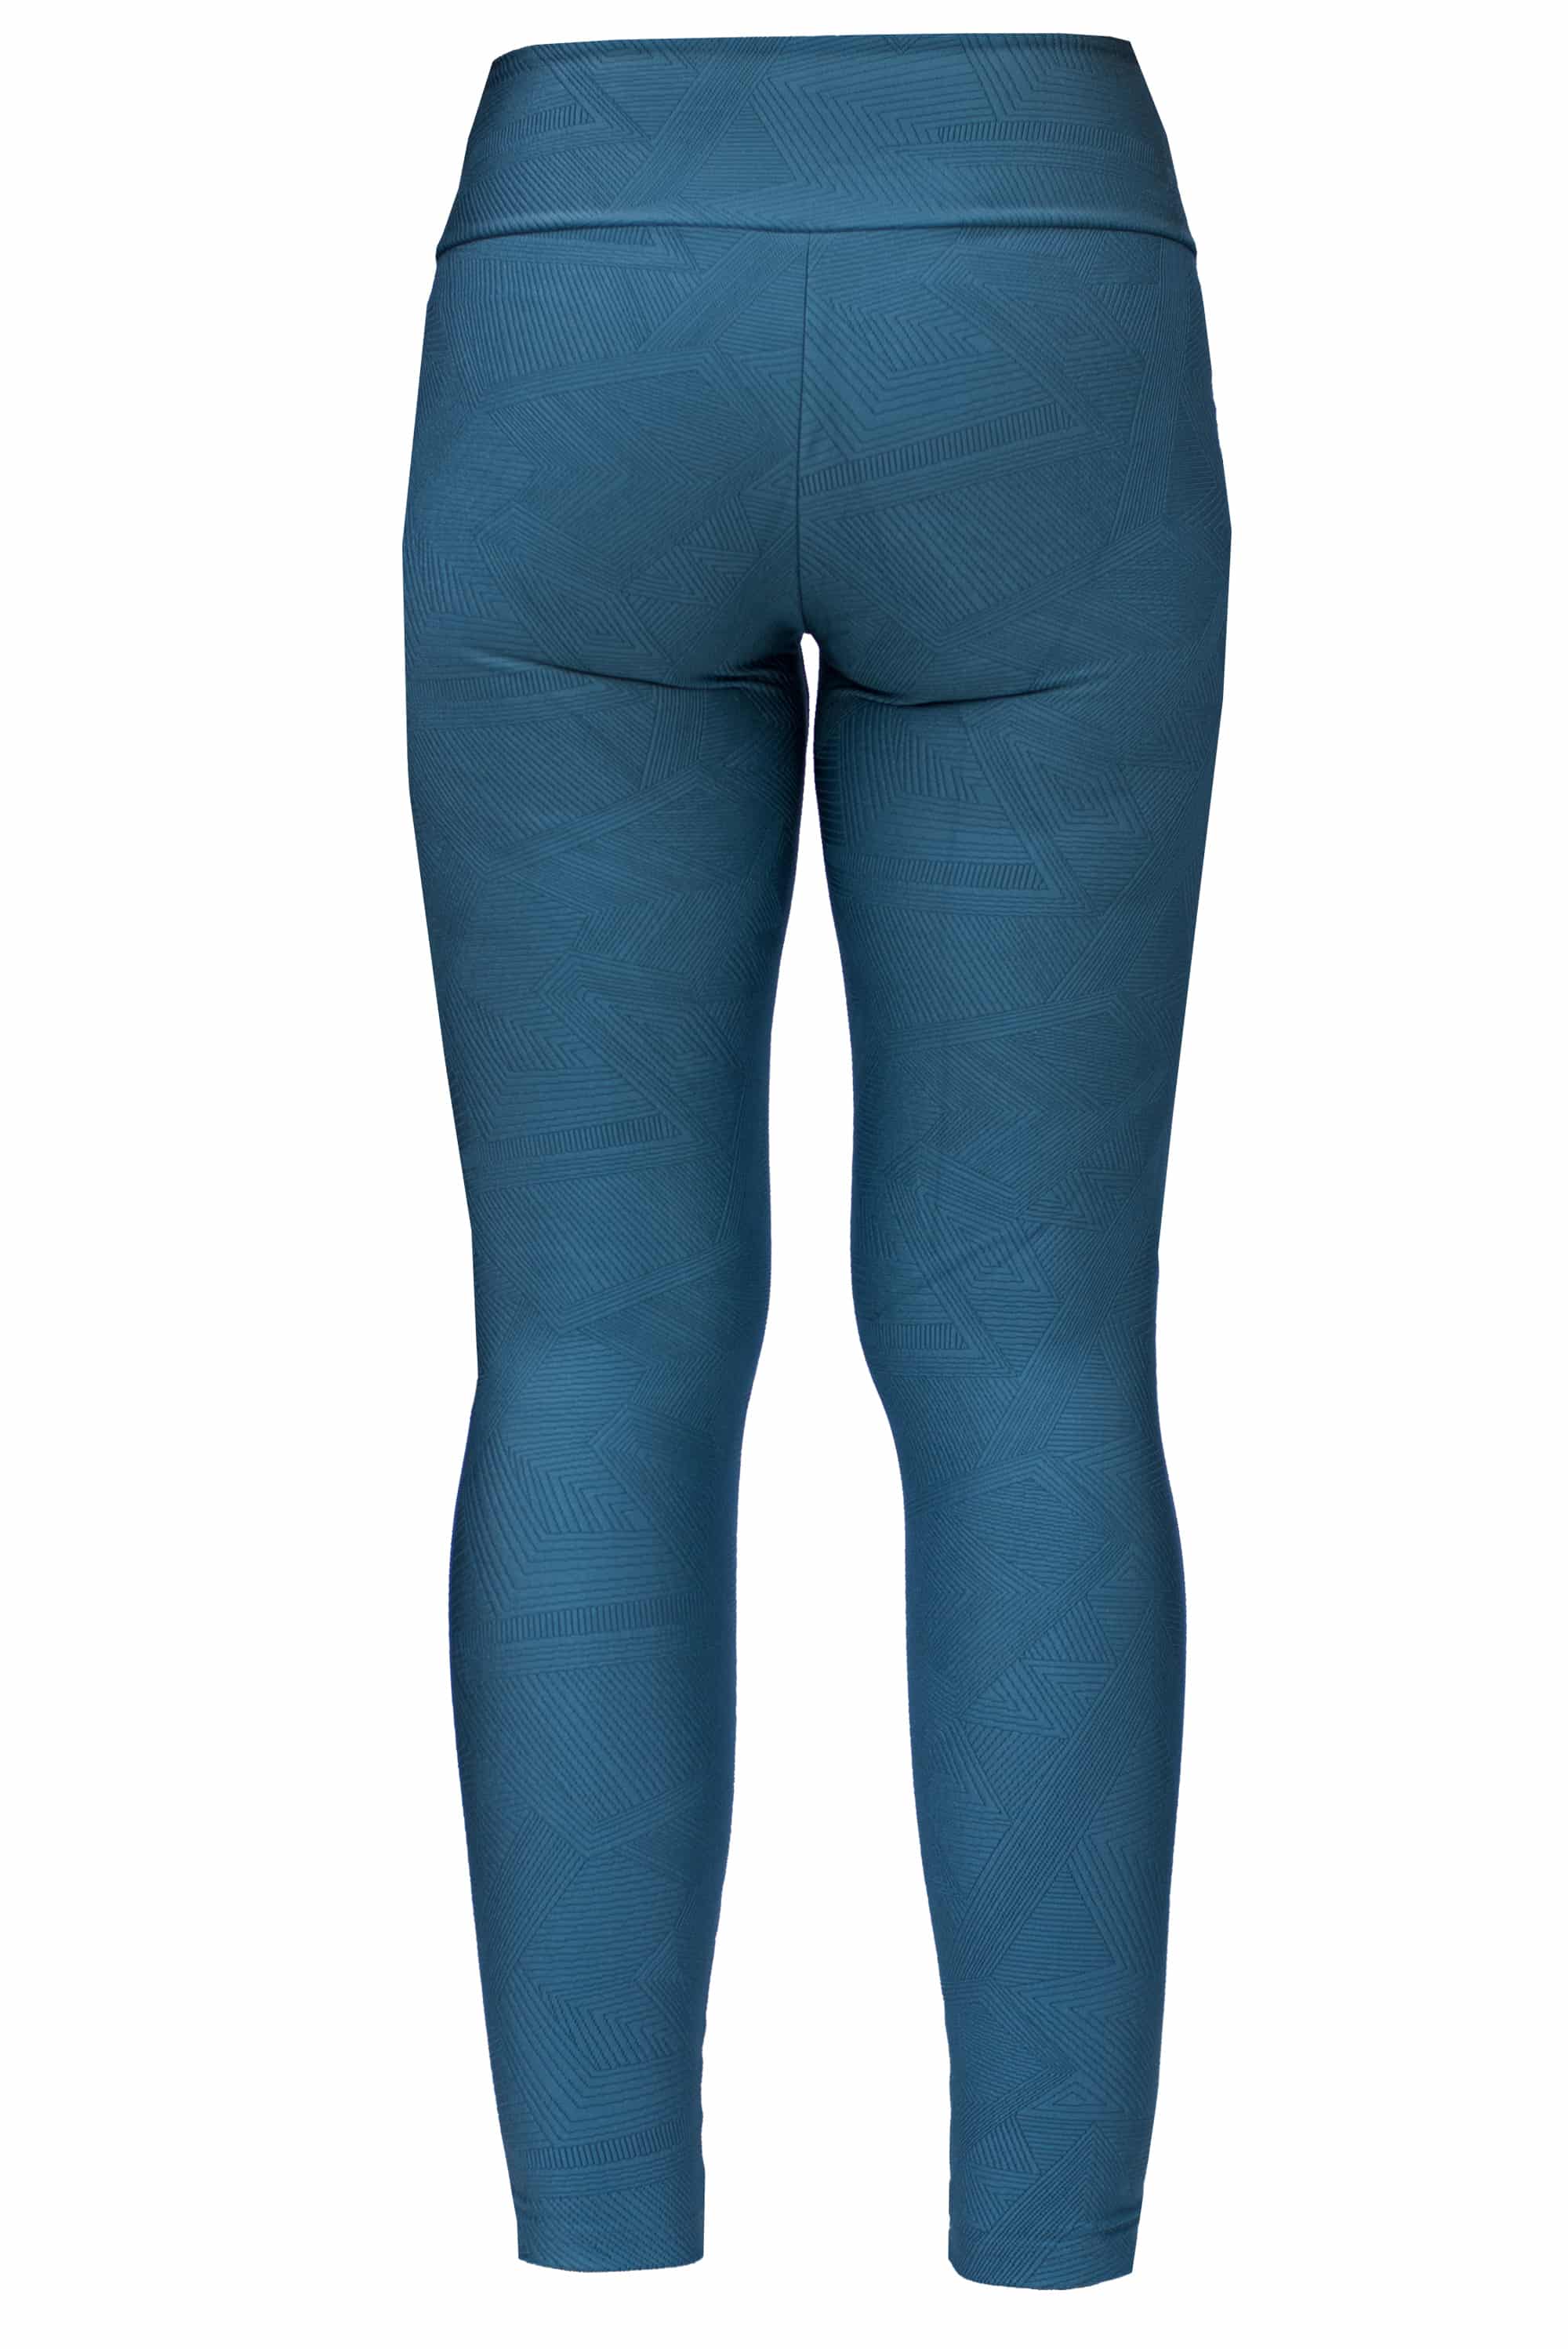 Blue leggings with jacquard knitted pattern